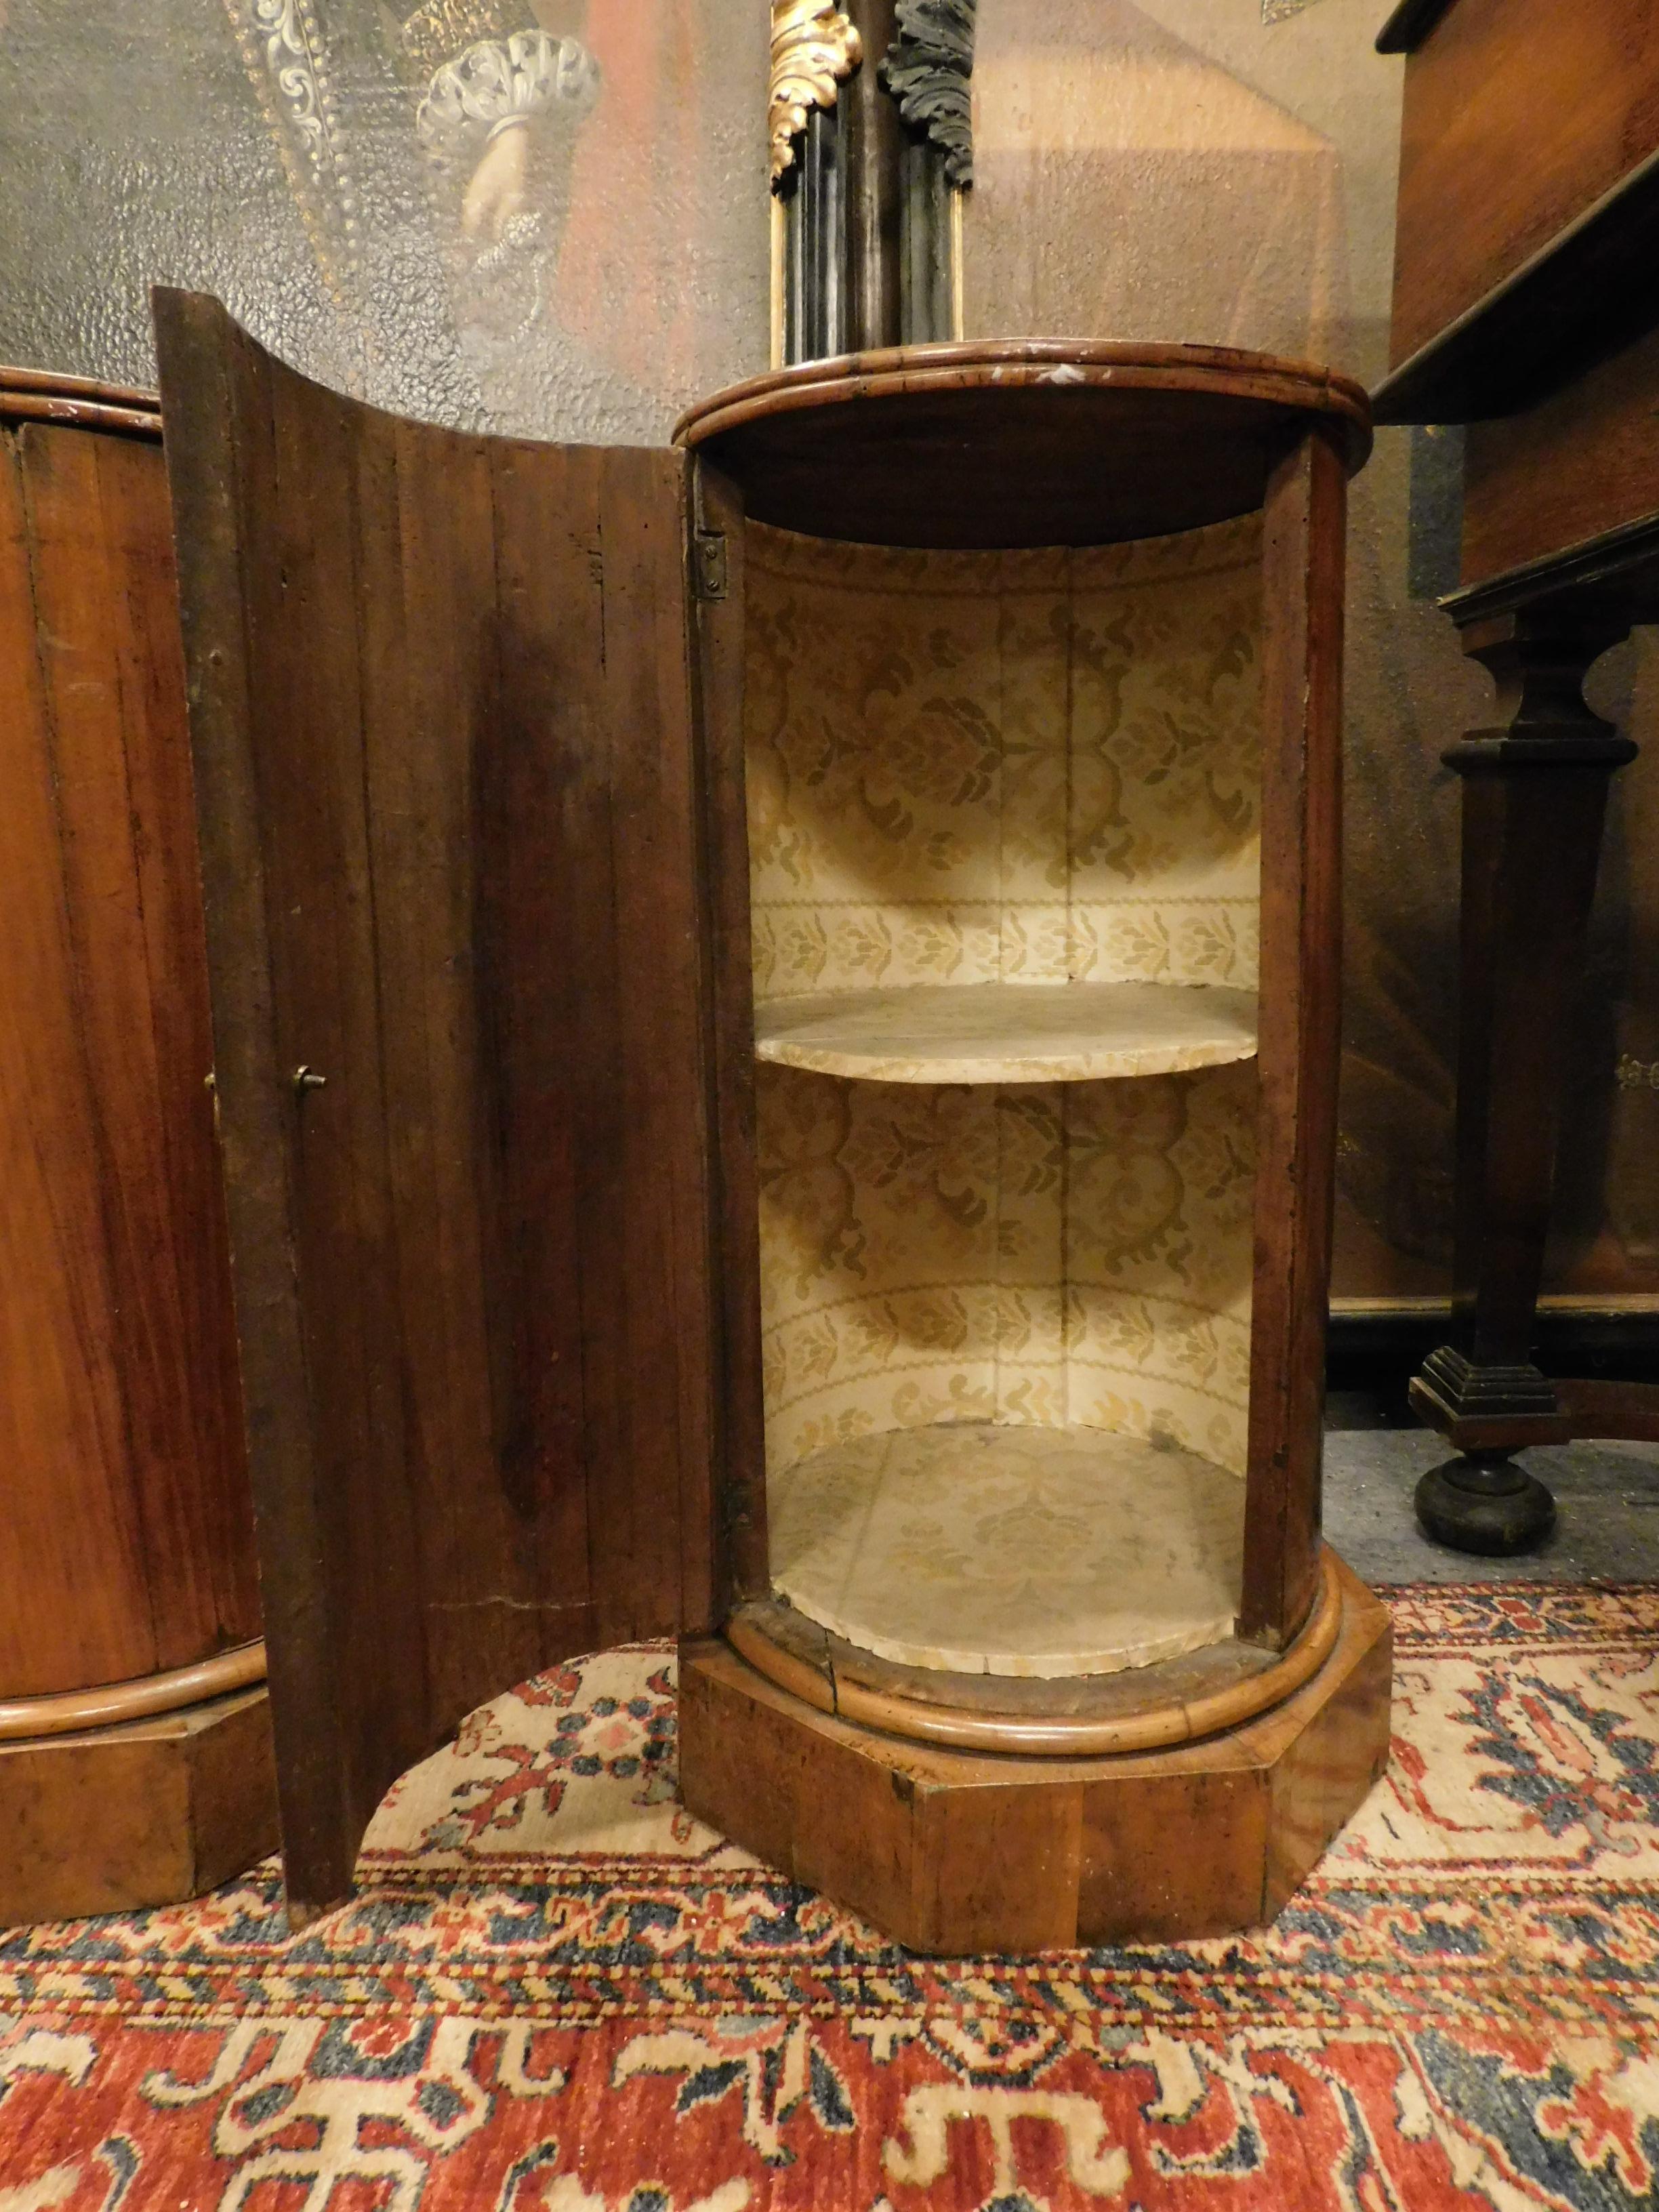 Ancient pair of cylindrical tables, rounded shape carved in beautiful and patinated walnut briar, they were night tables, hand-built at the beginning of the 19th century (first half of the 19th century) from Rome, internally they are lined and have